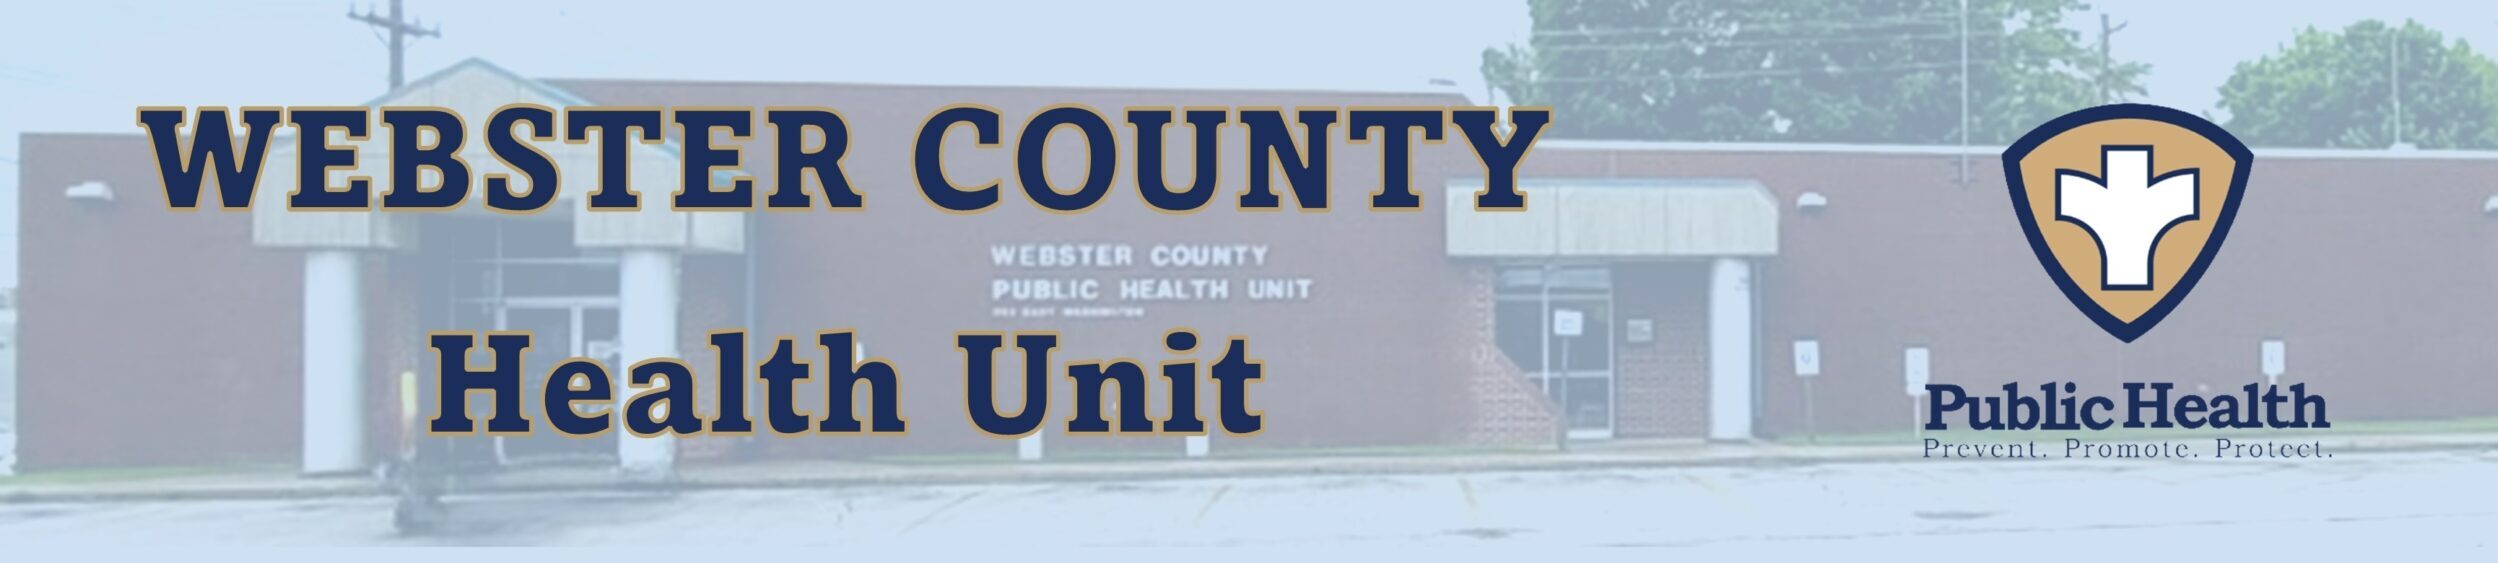 Webster County Health Unit